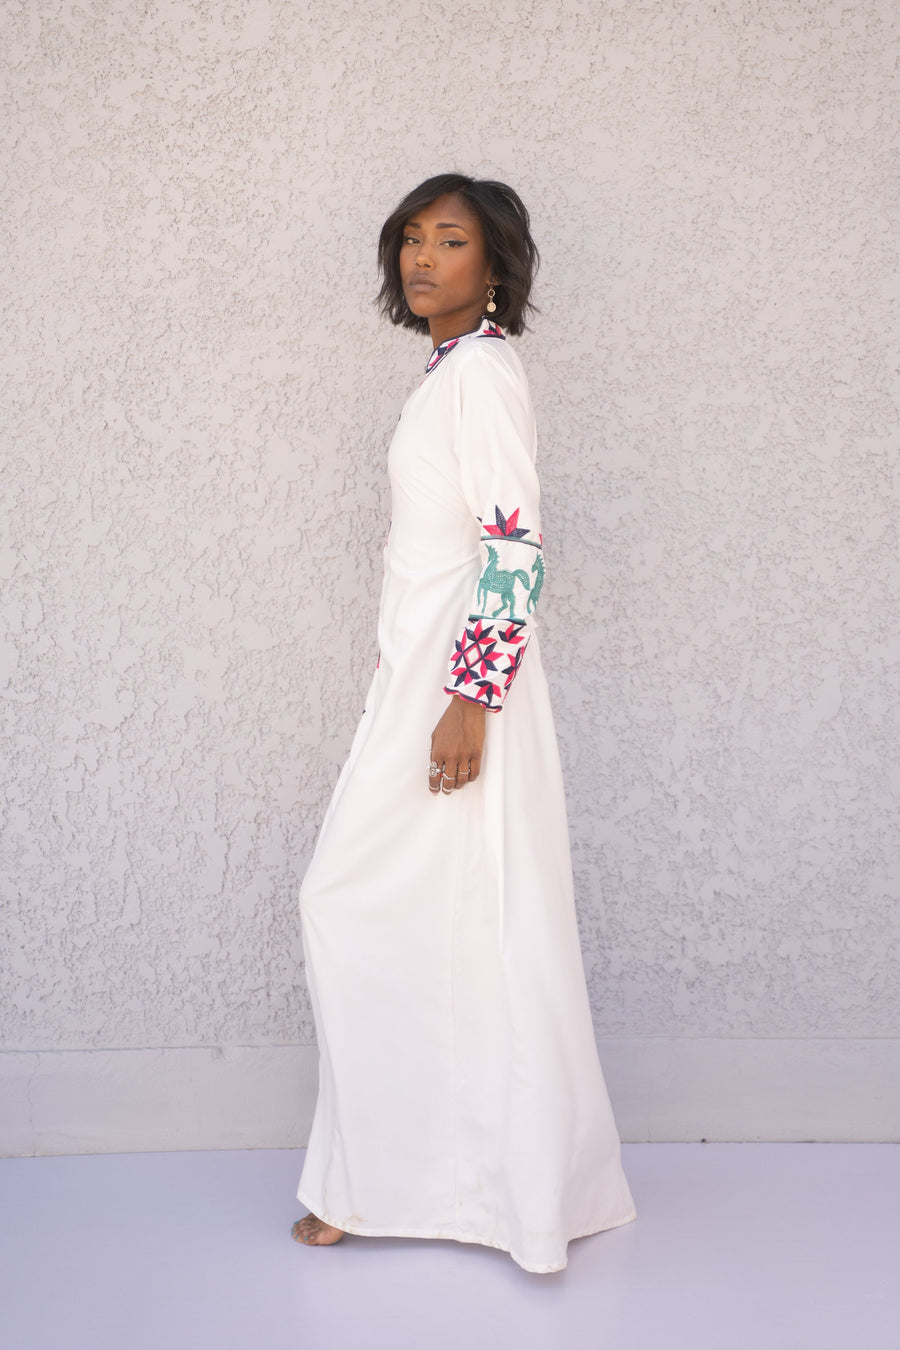 Chic White embroidered cotton Caftan, caftans for women, Kaftans, embroidered Caftan dress, Caftan maxi dress, Caftans for women, Caftans